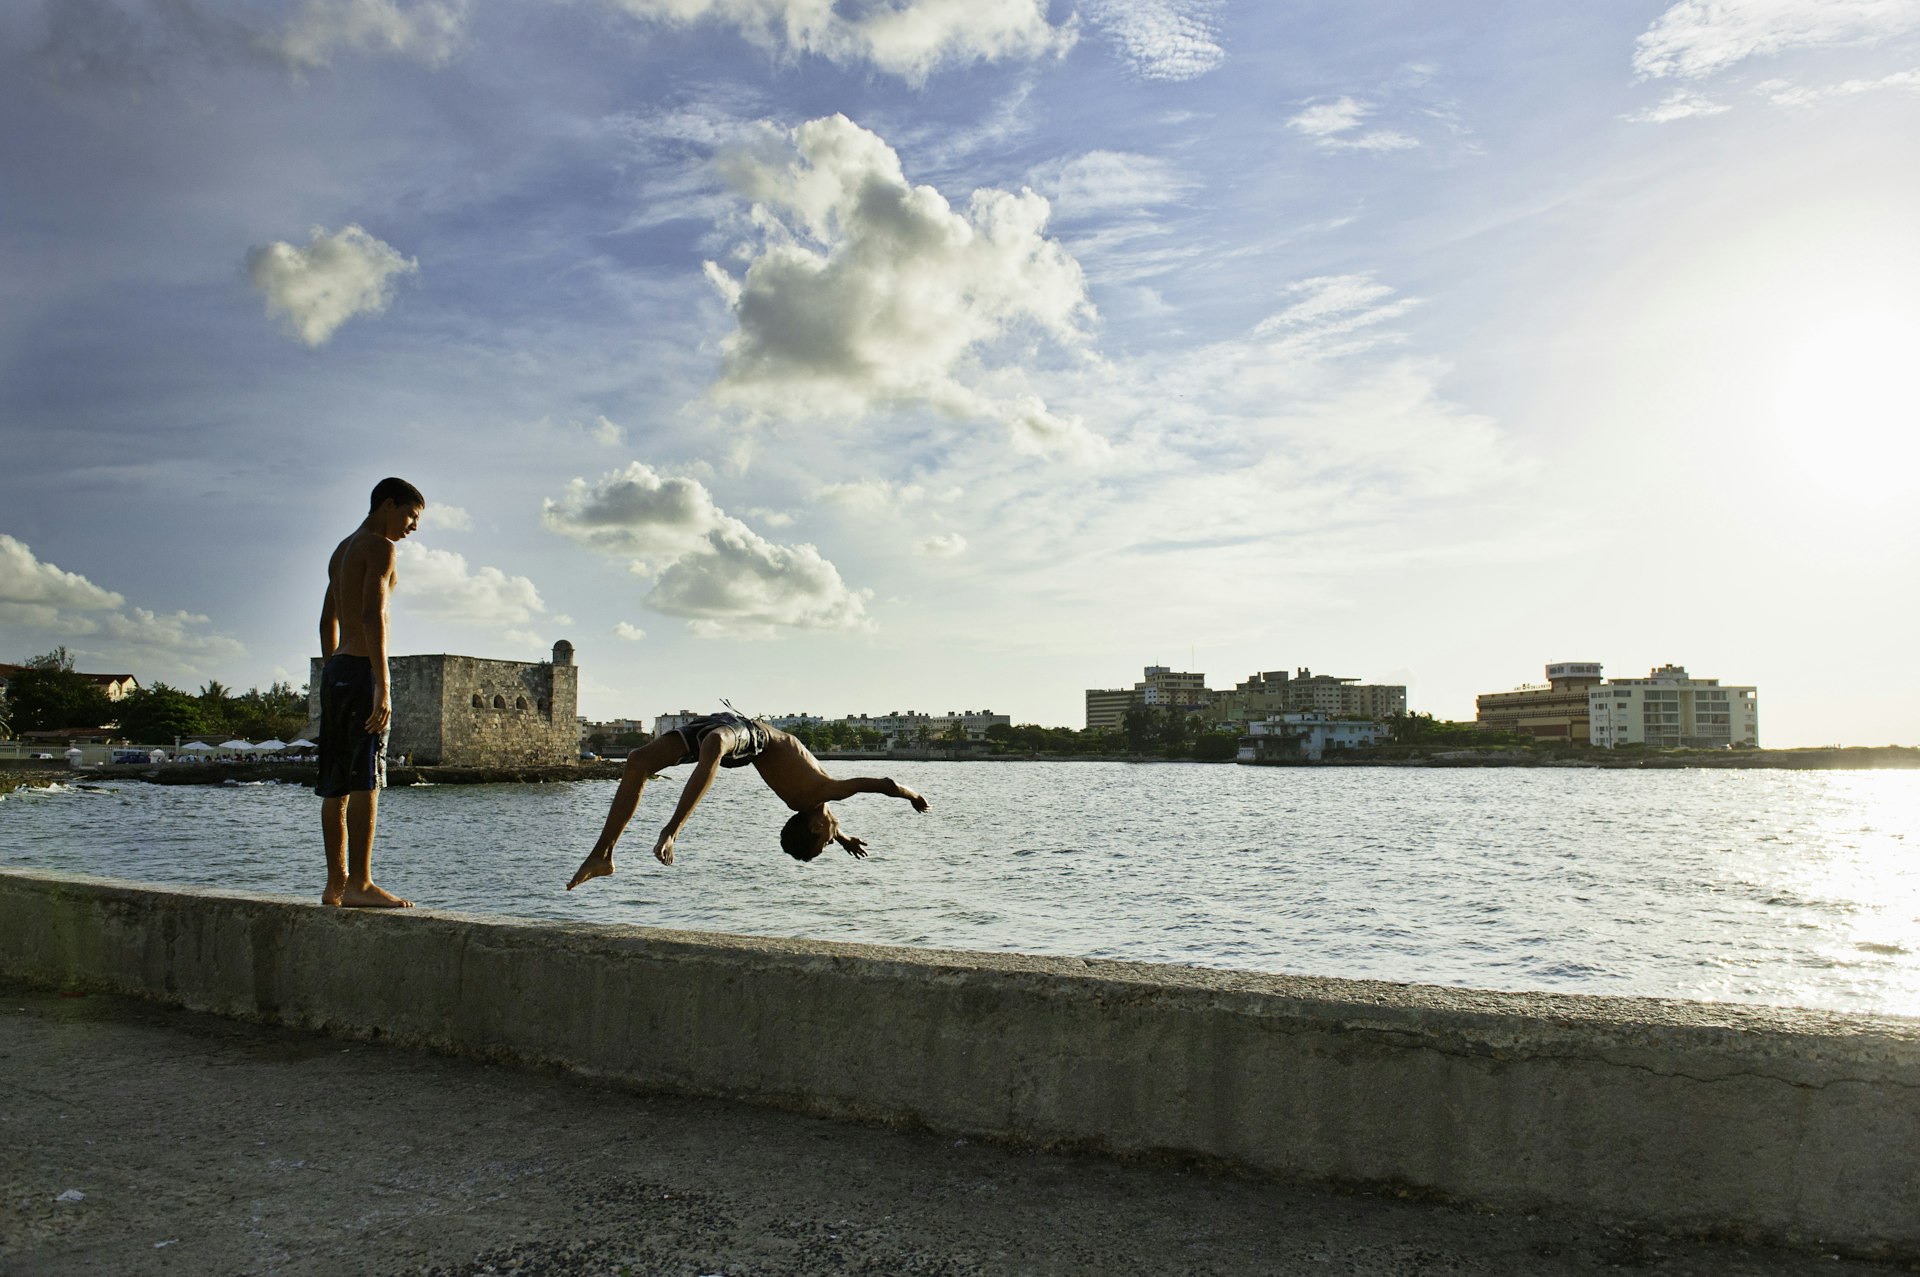 A boy stands on the harbor wall in Havana watching another boy backflip off into the water below